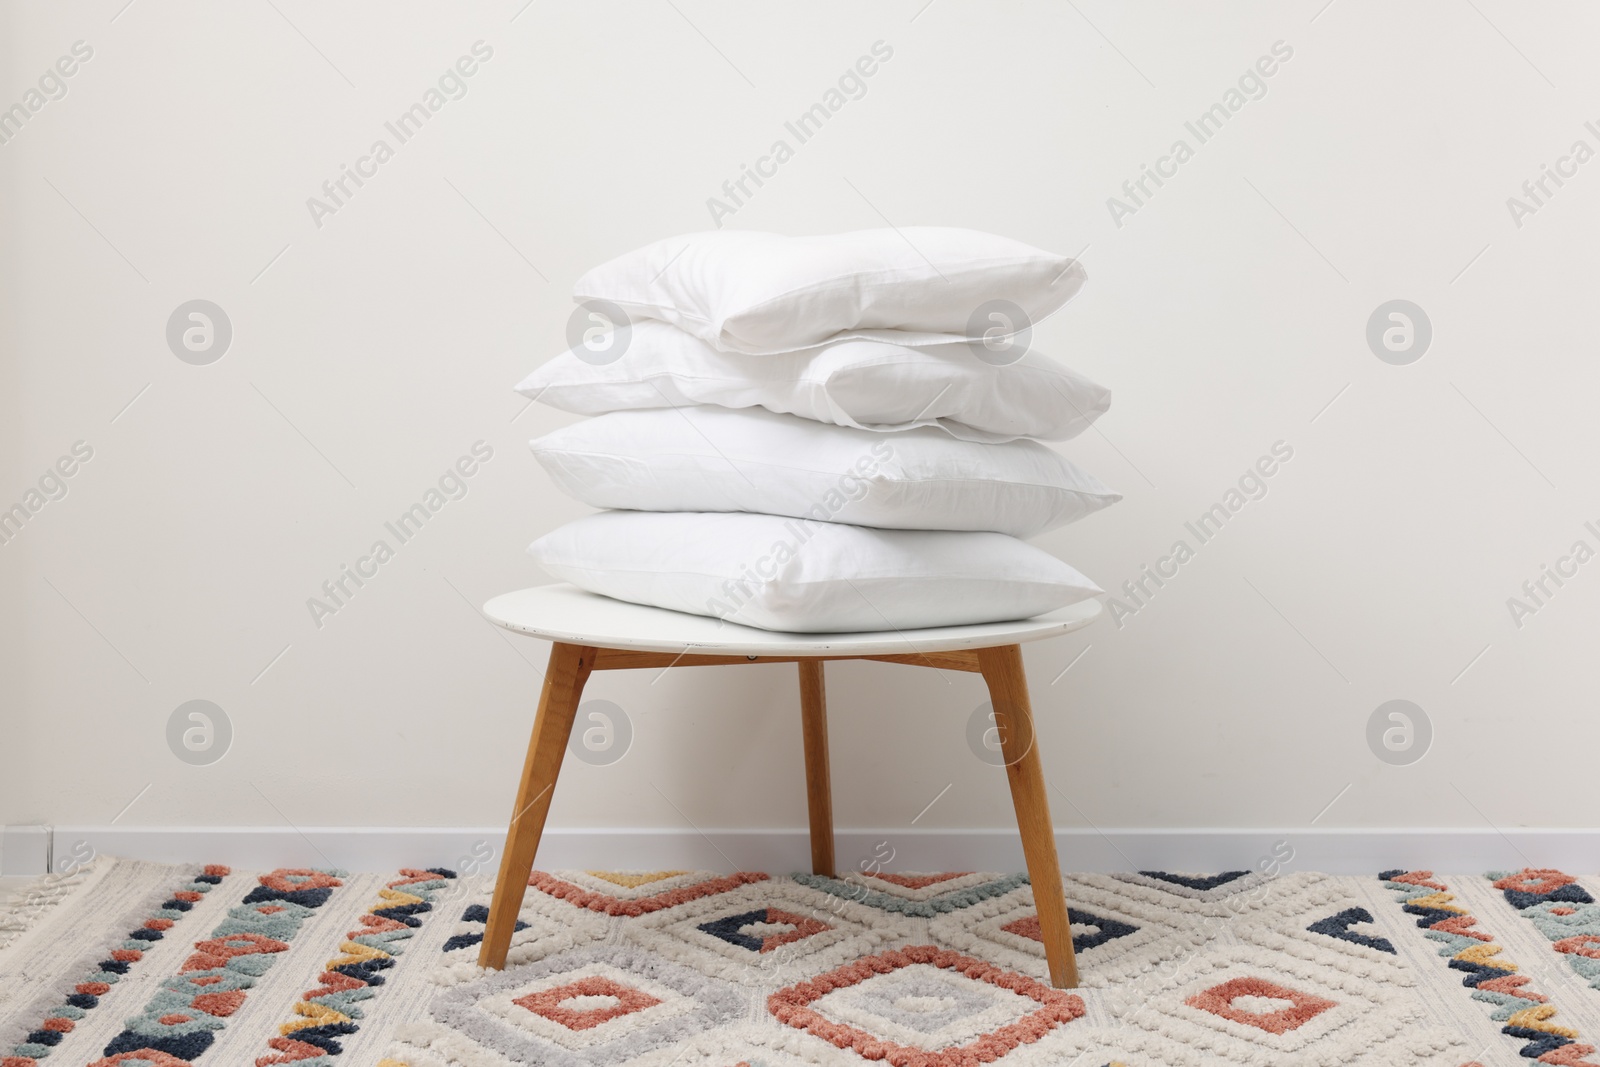 Photo of Soft pillows on side table near light wall indoors